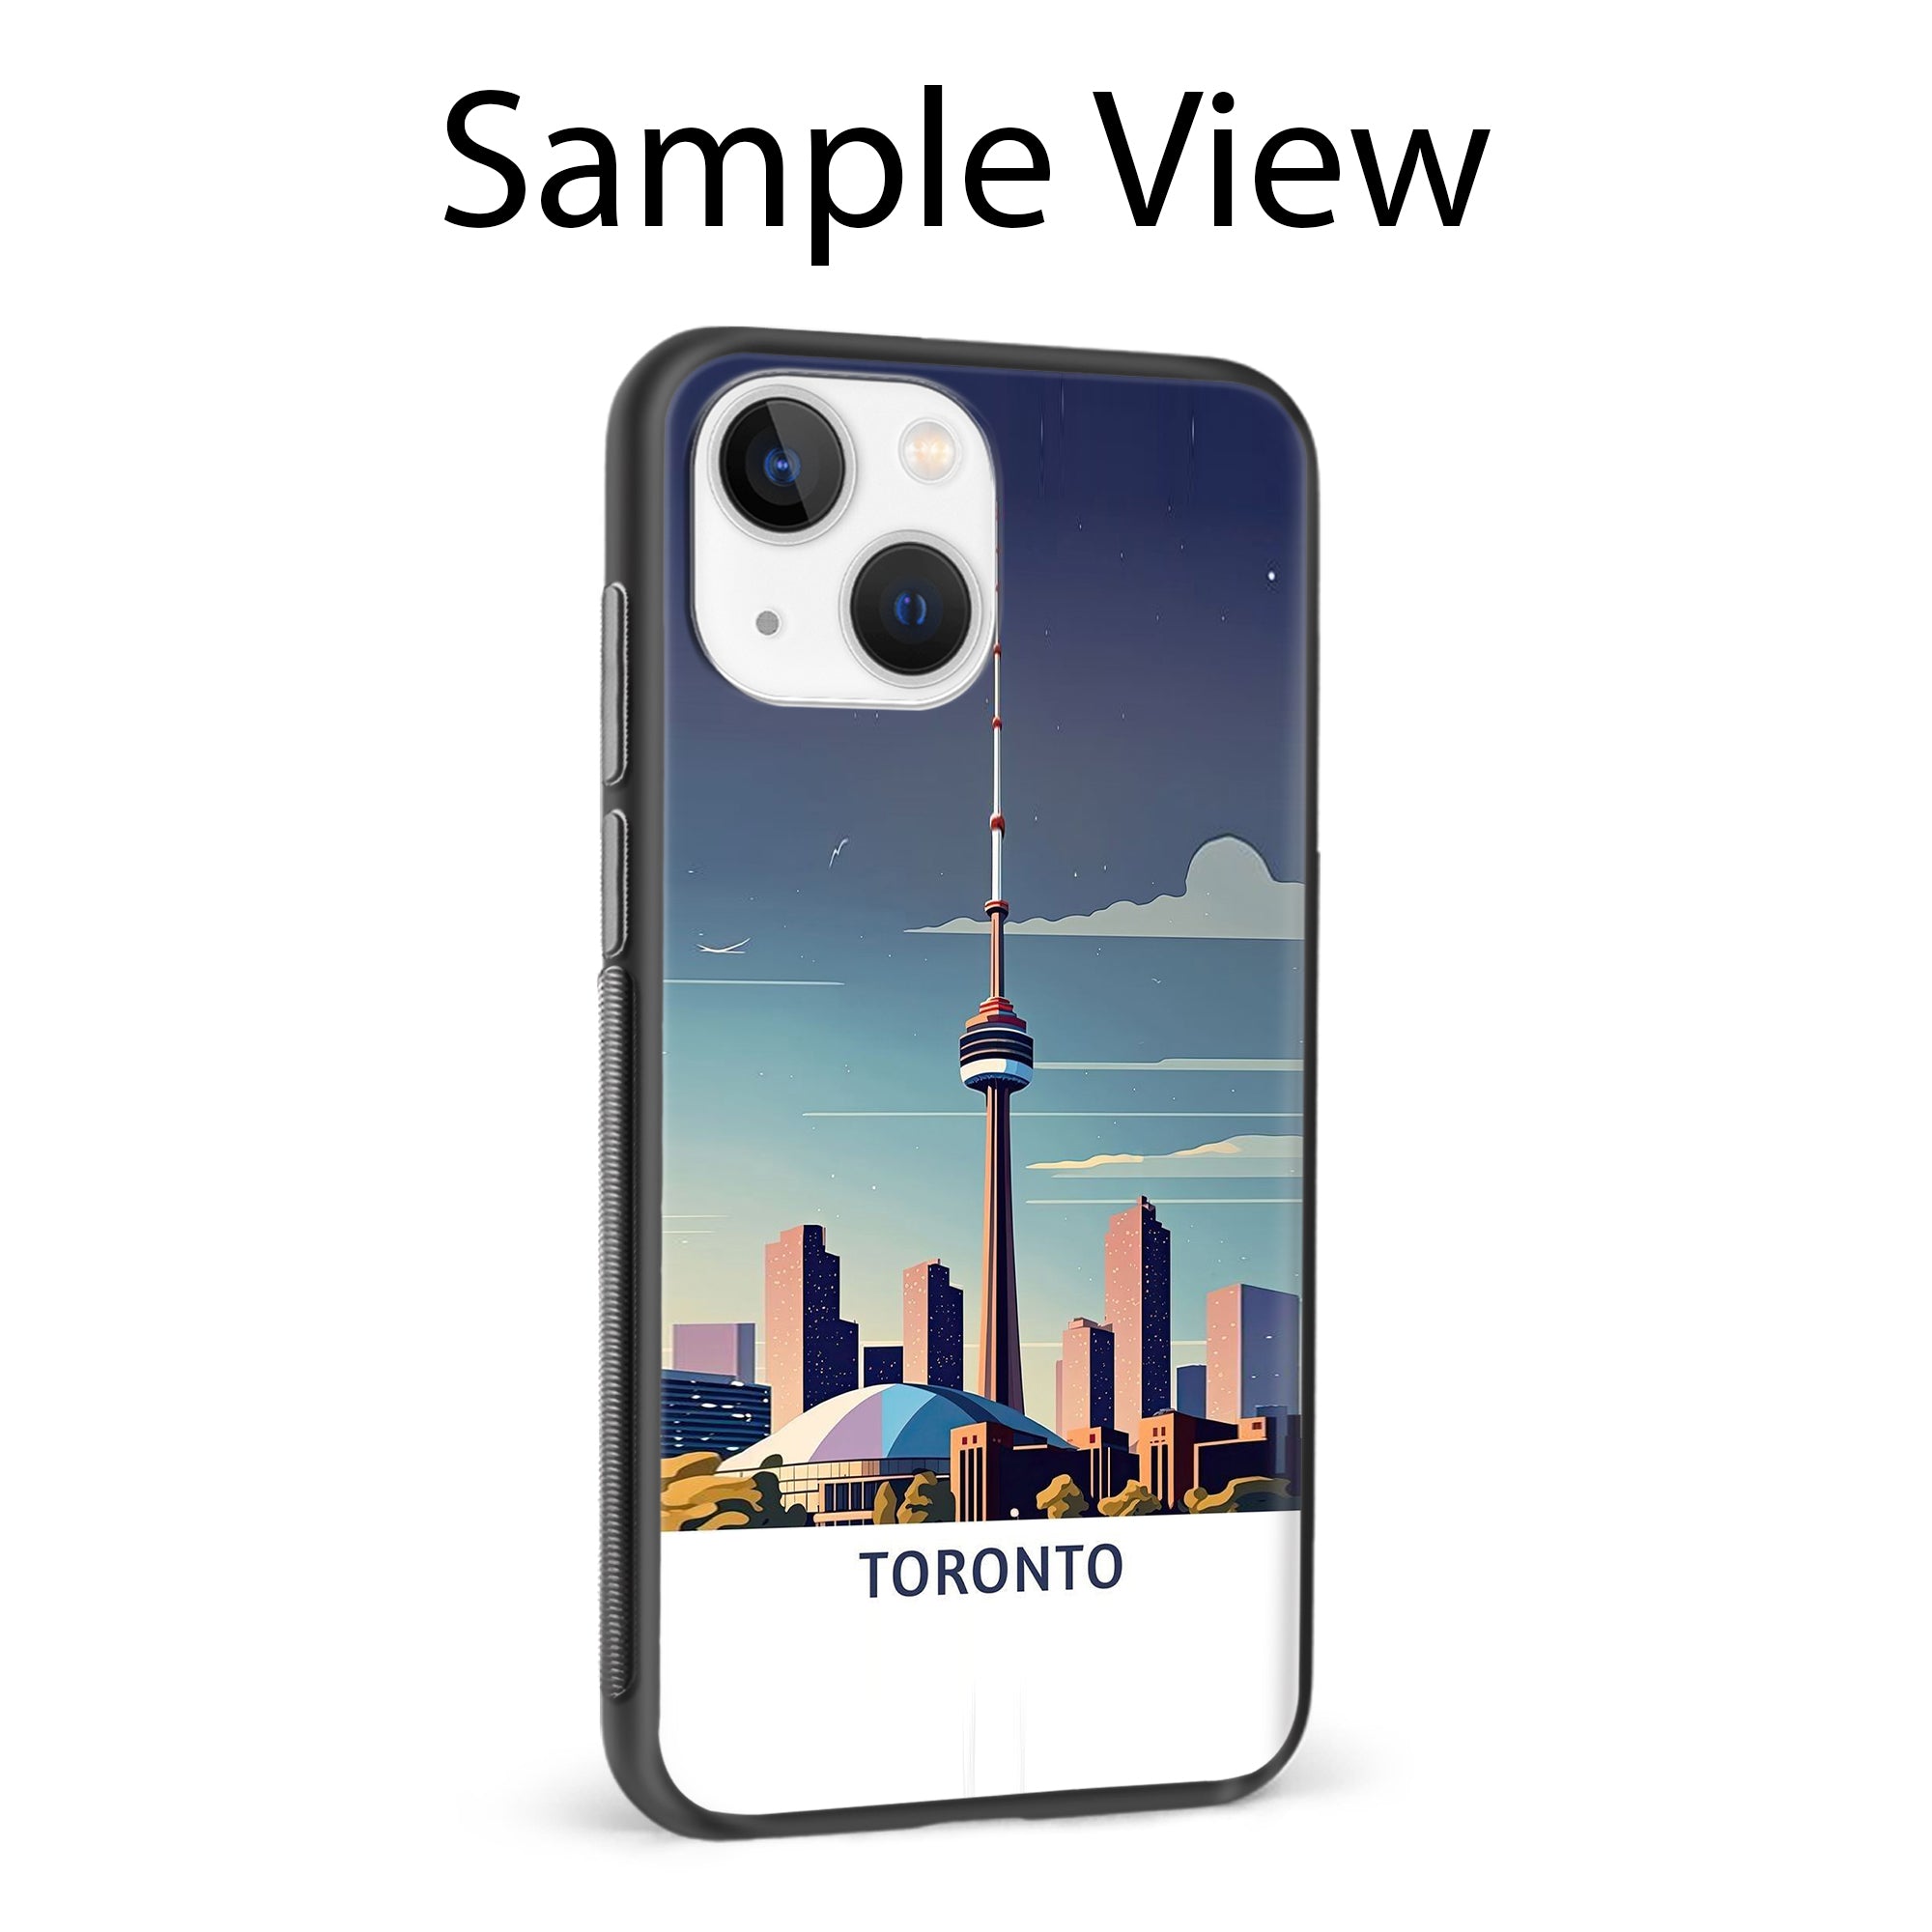 Buy Toronto Metal-Silicon Back Mobile Phone Case/Cover For Samsung Galaxy M51 Online